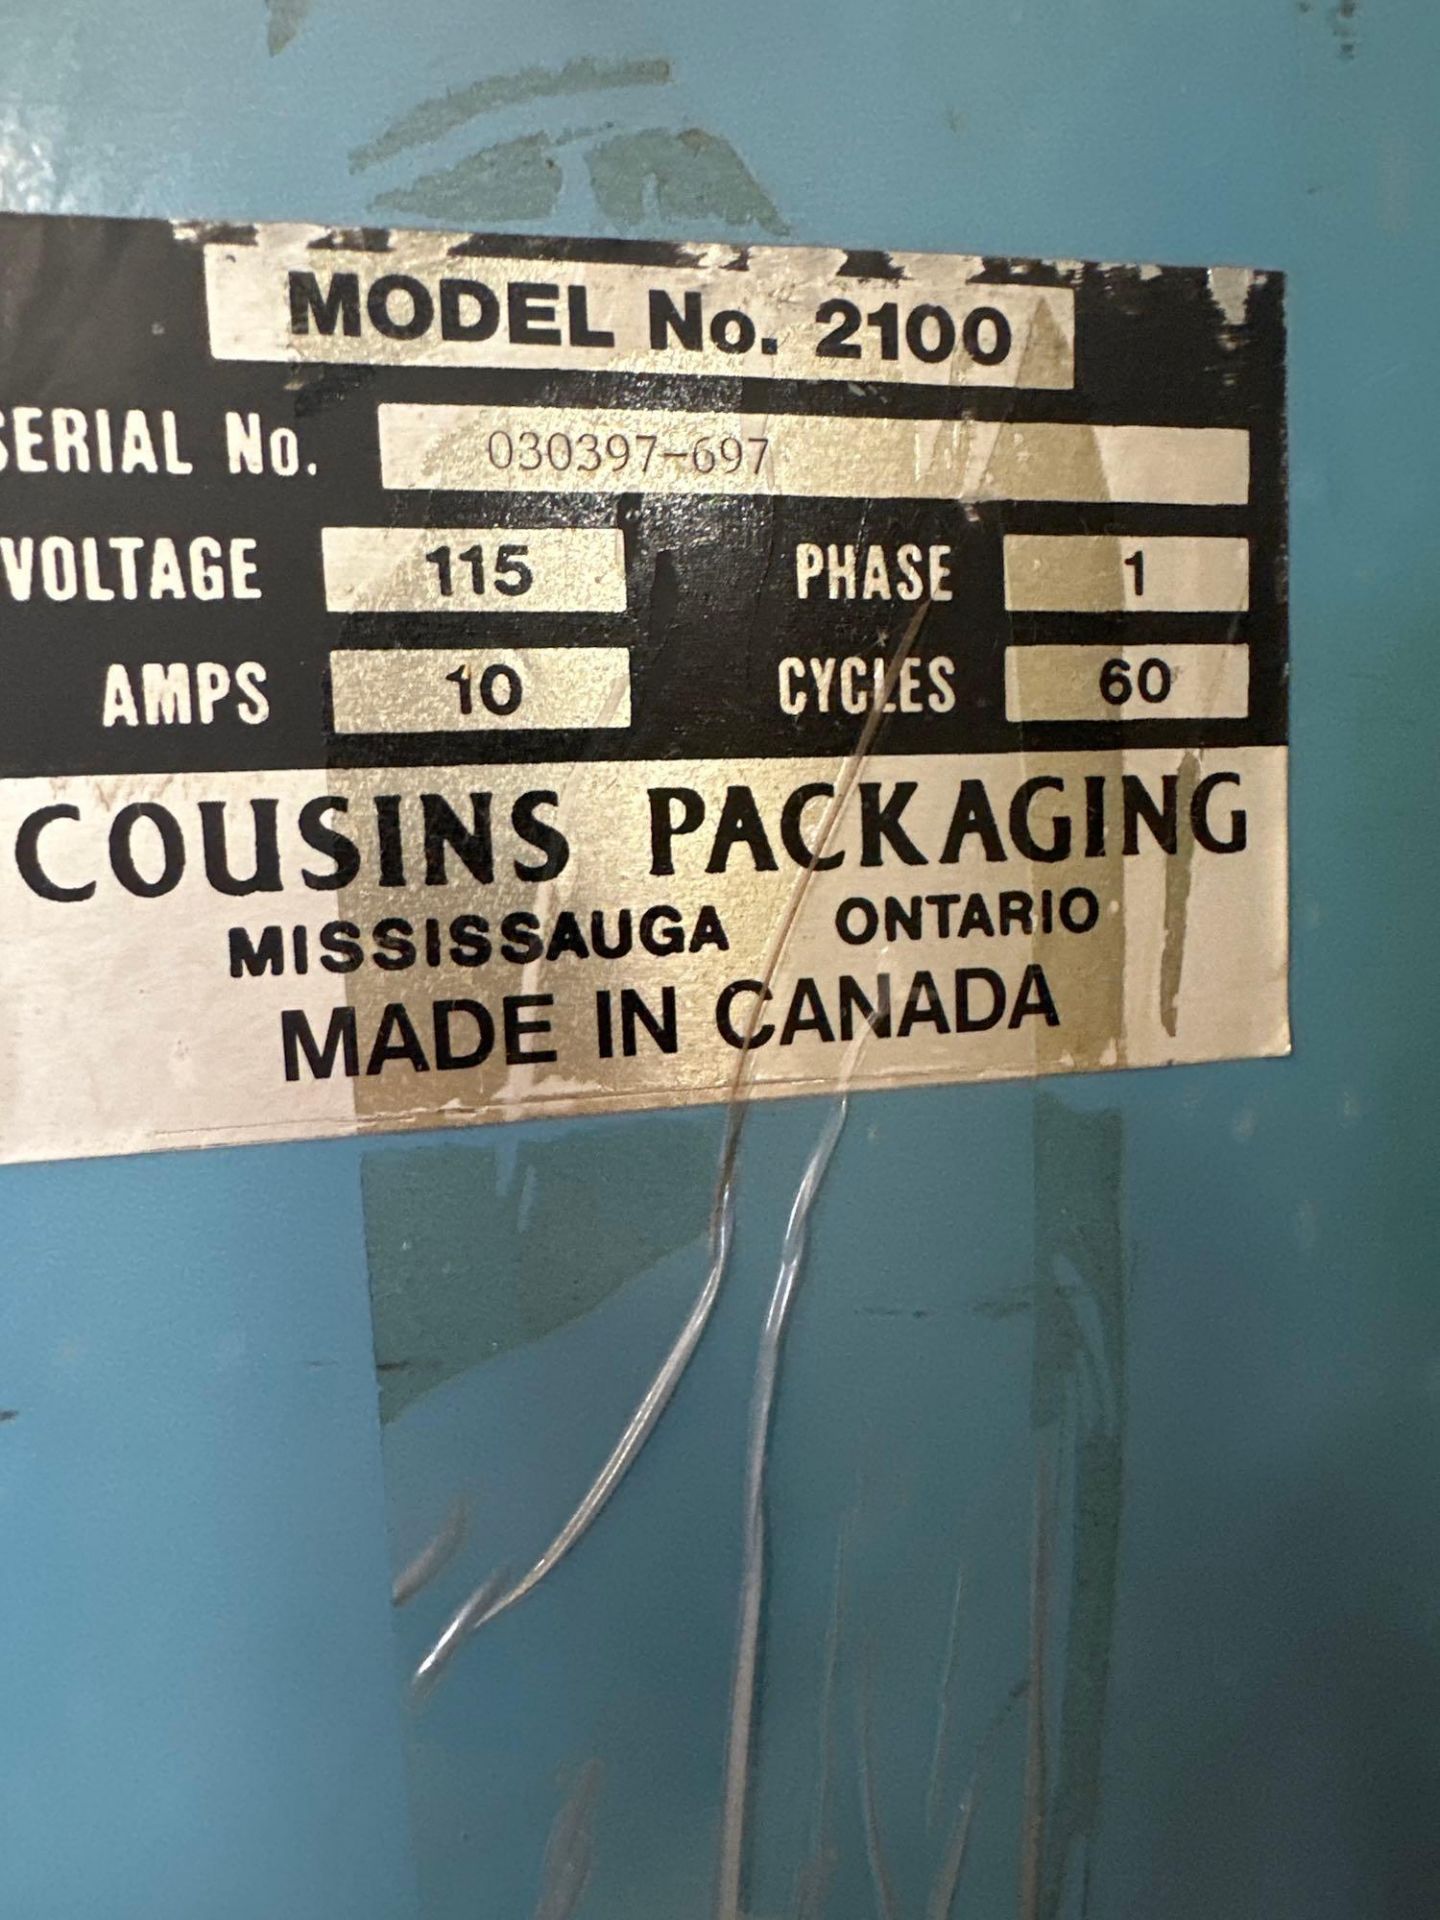 COUSINS PACKAGING MODEL NO. 2100 SCALE & SHRINK WRAPPER - Image 7 of 7